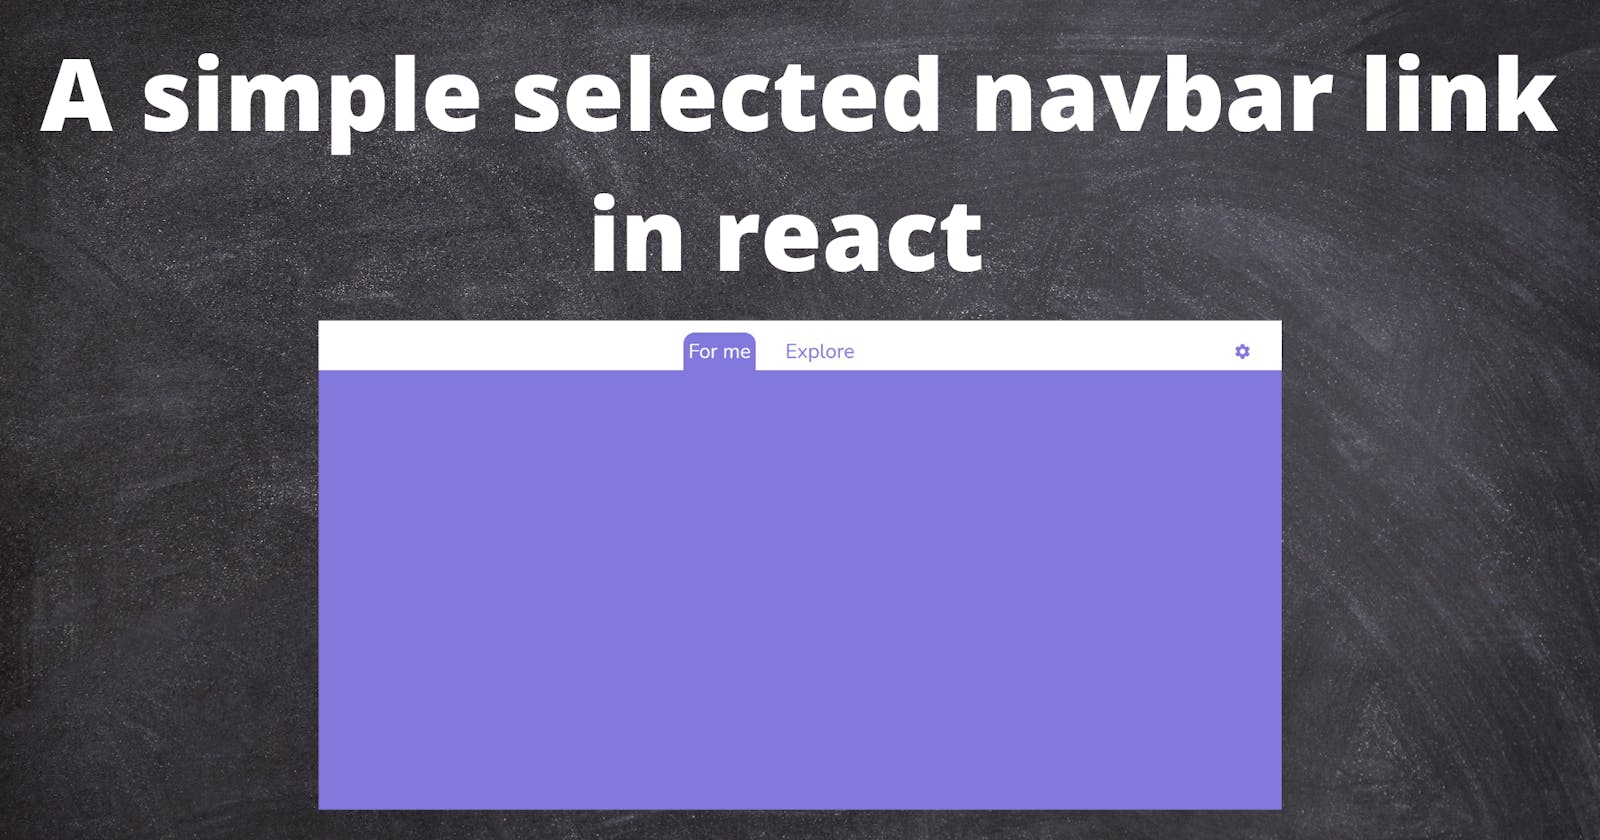 How to create a simple selected navbar link in react